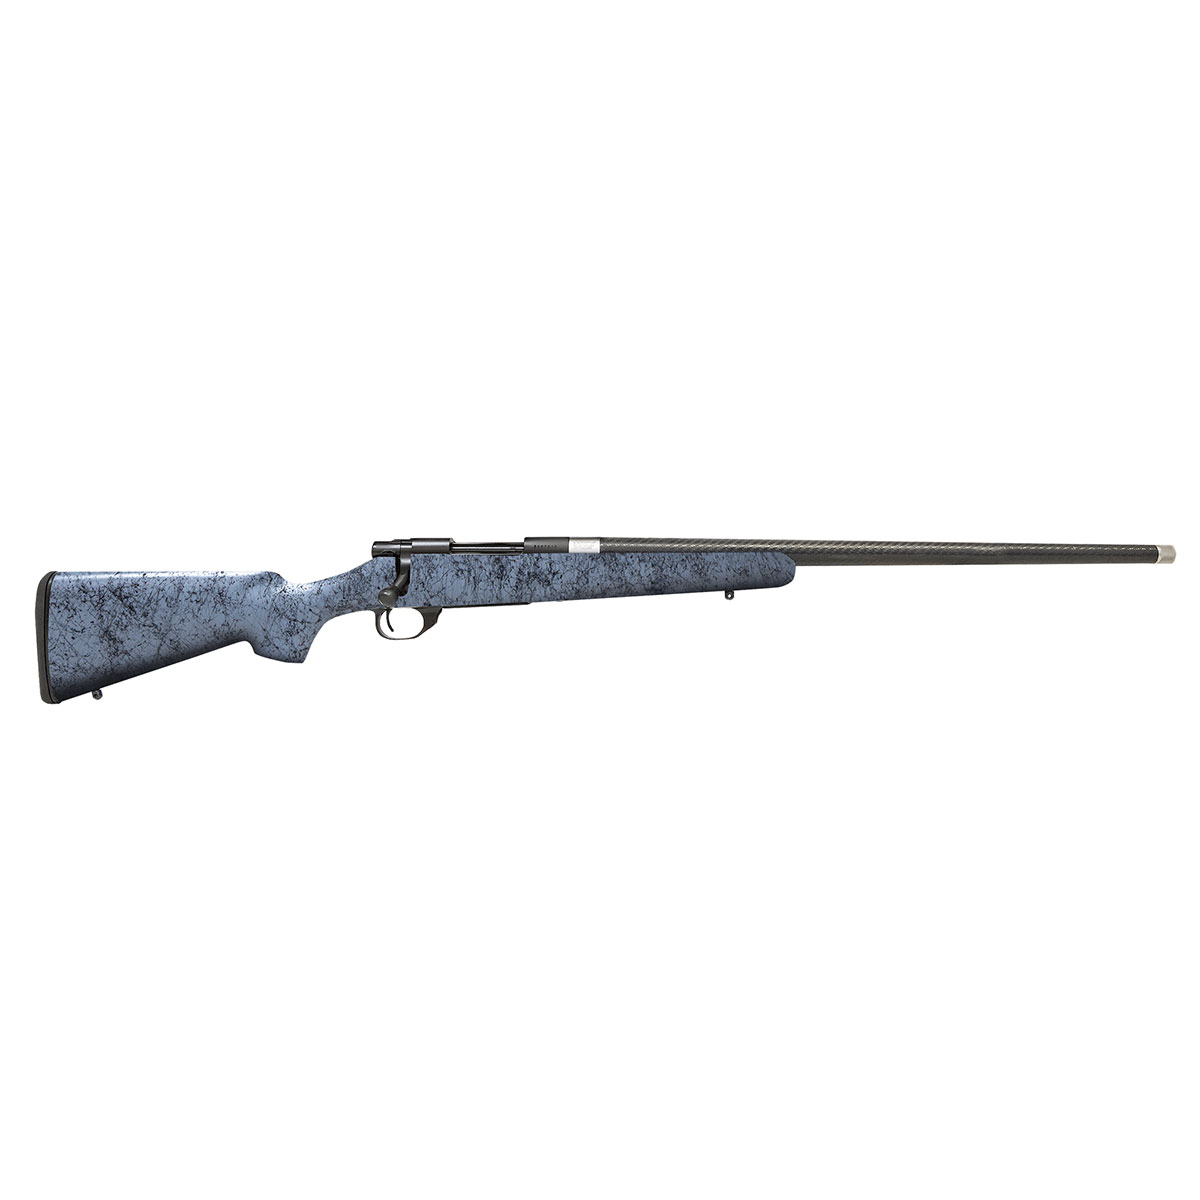 HOWA - M1500 CARBON ELEVATE 6.5 CREEDMOOR BOLT-ACTION RIFLE